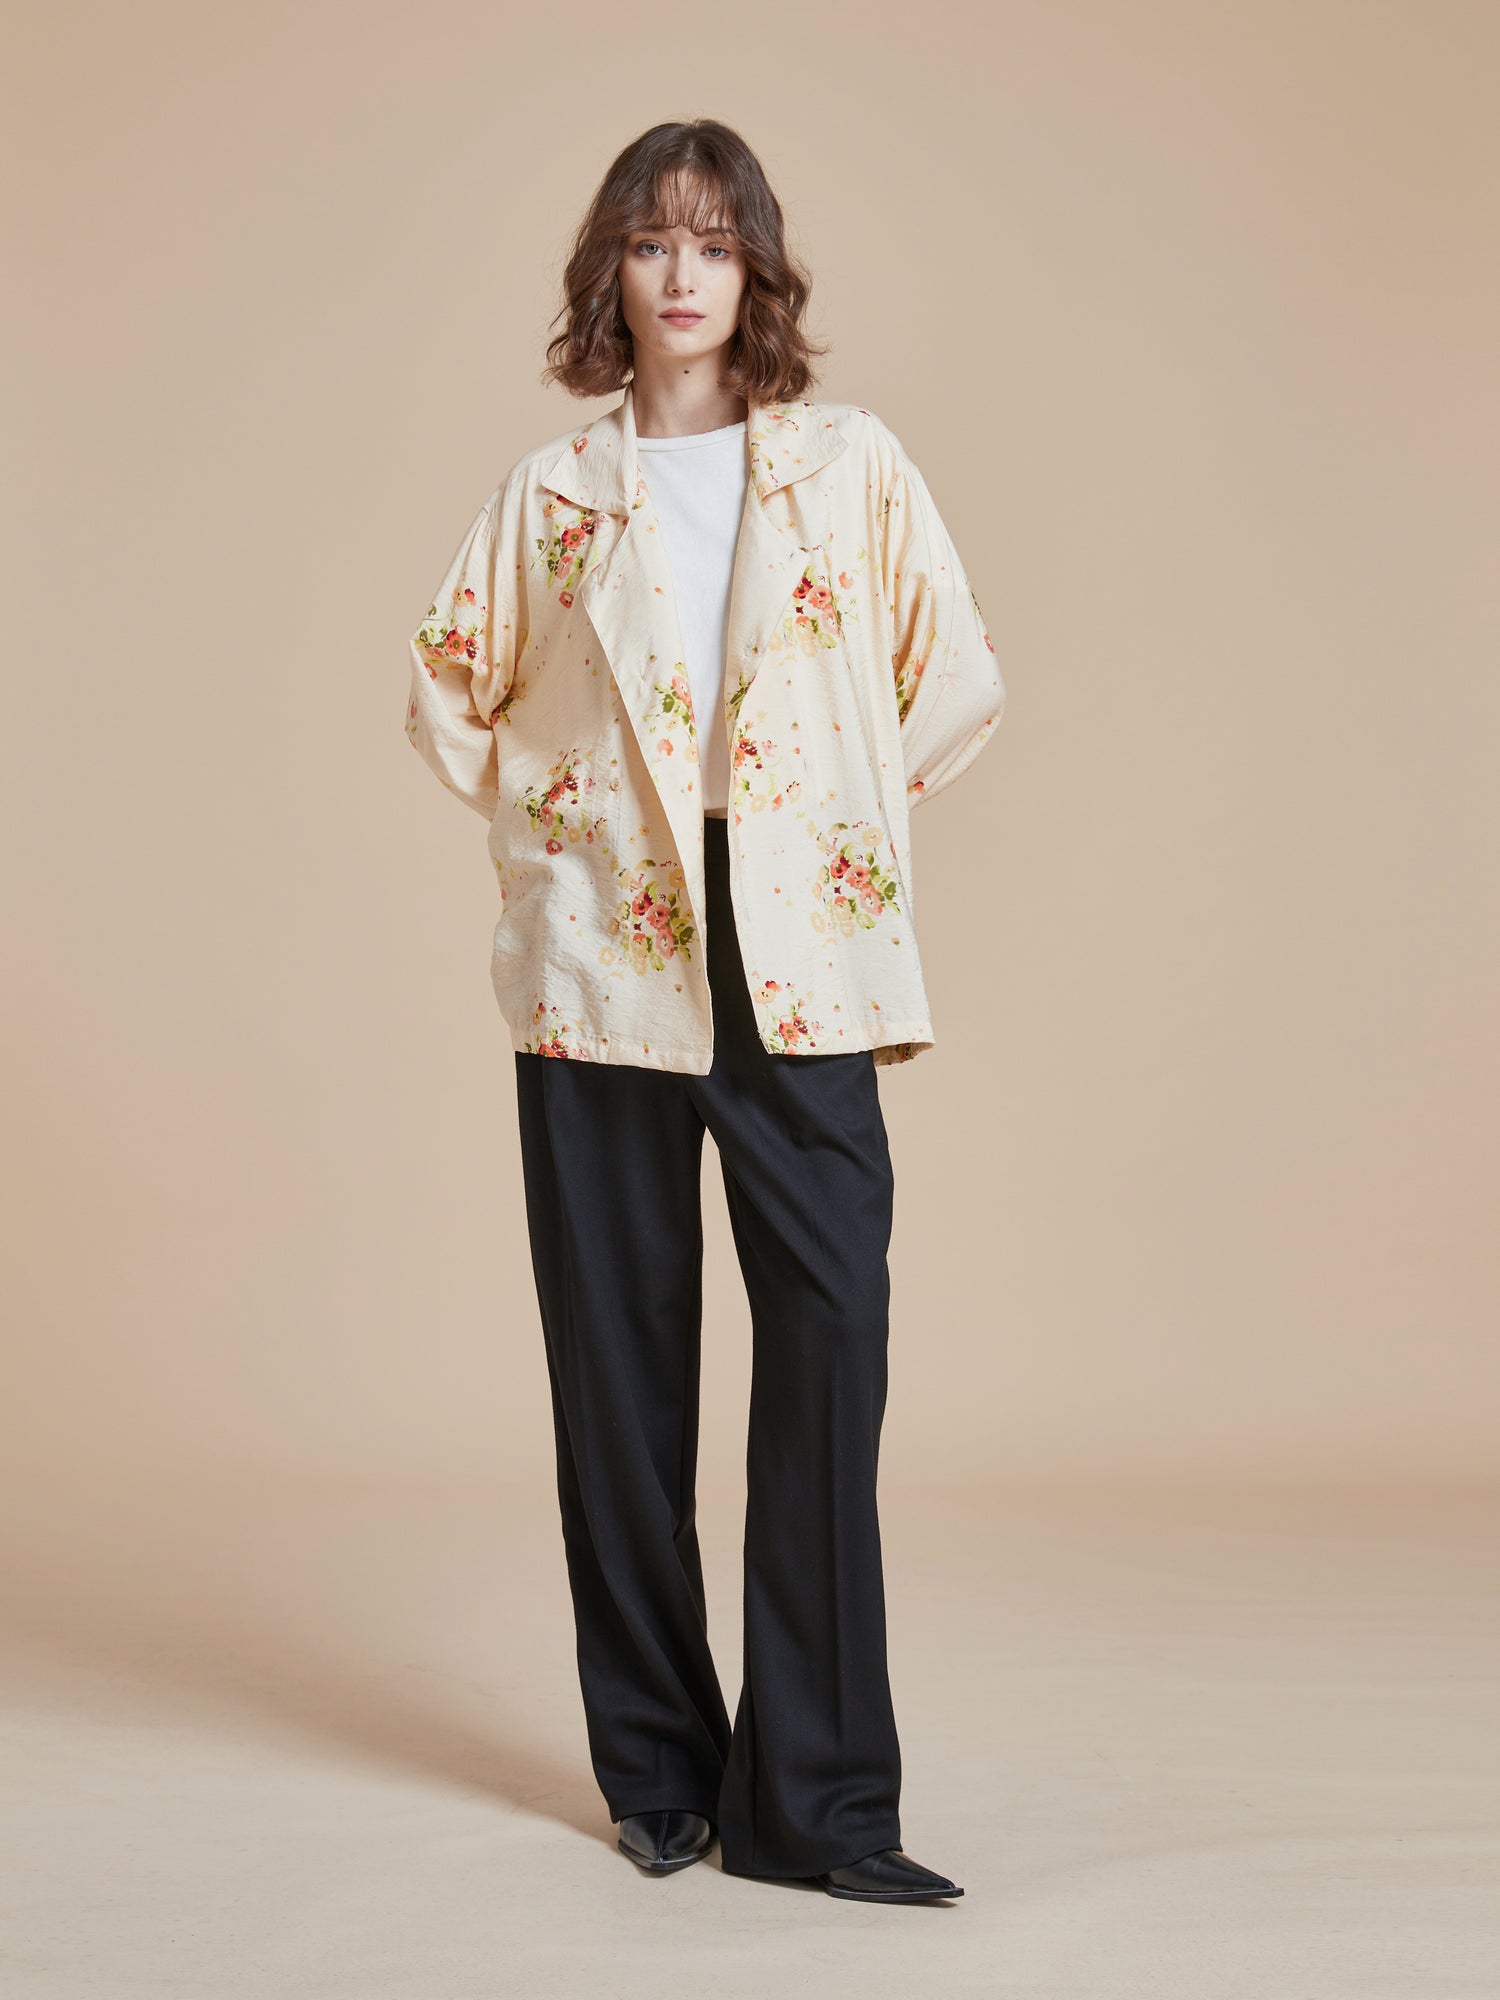 A model wearing a floral printed Found Kanhati Garden Long Sleeve Camp Shirt and black pants.